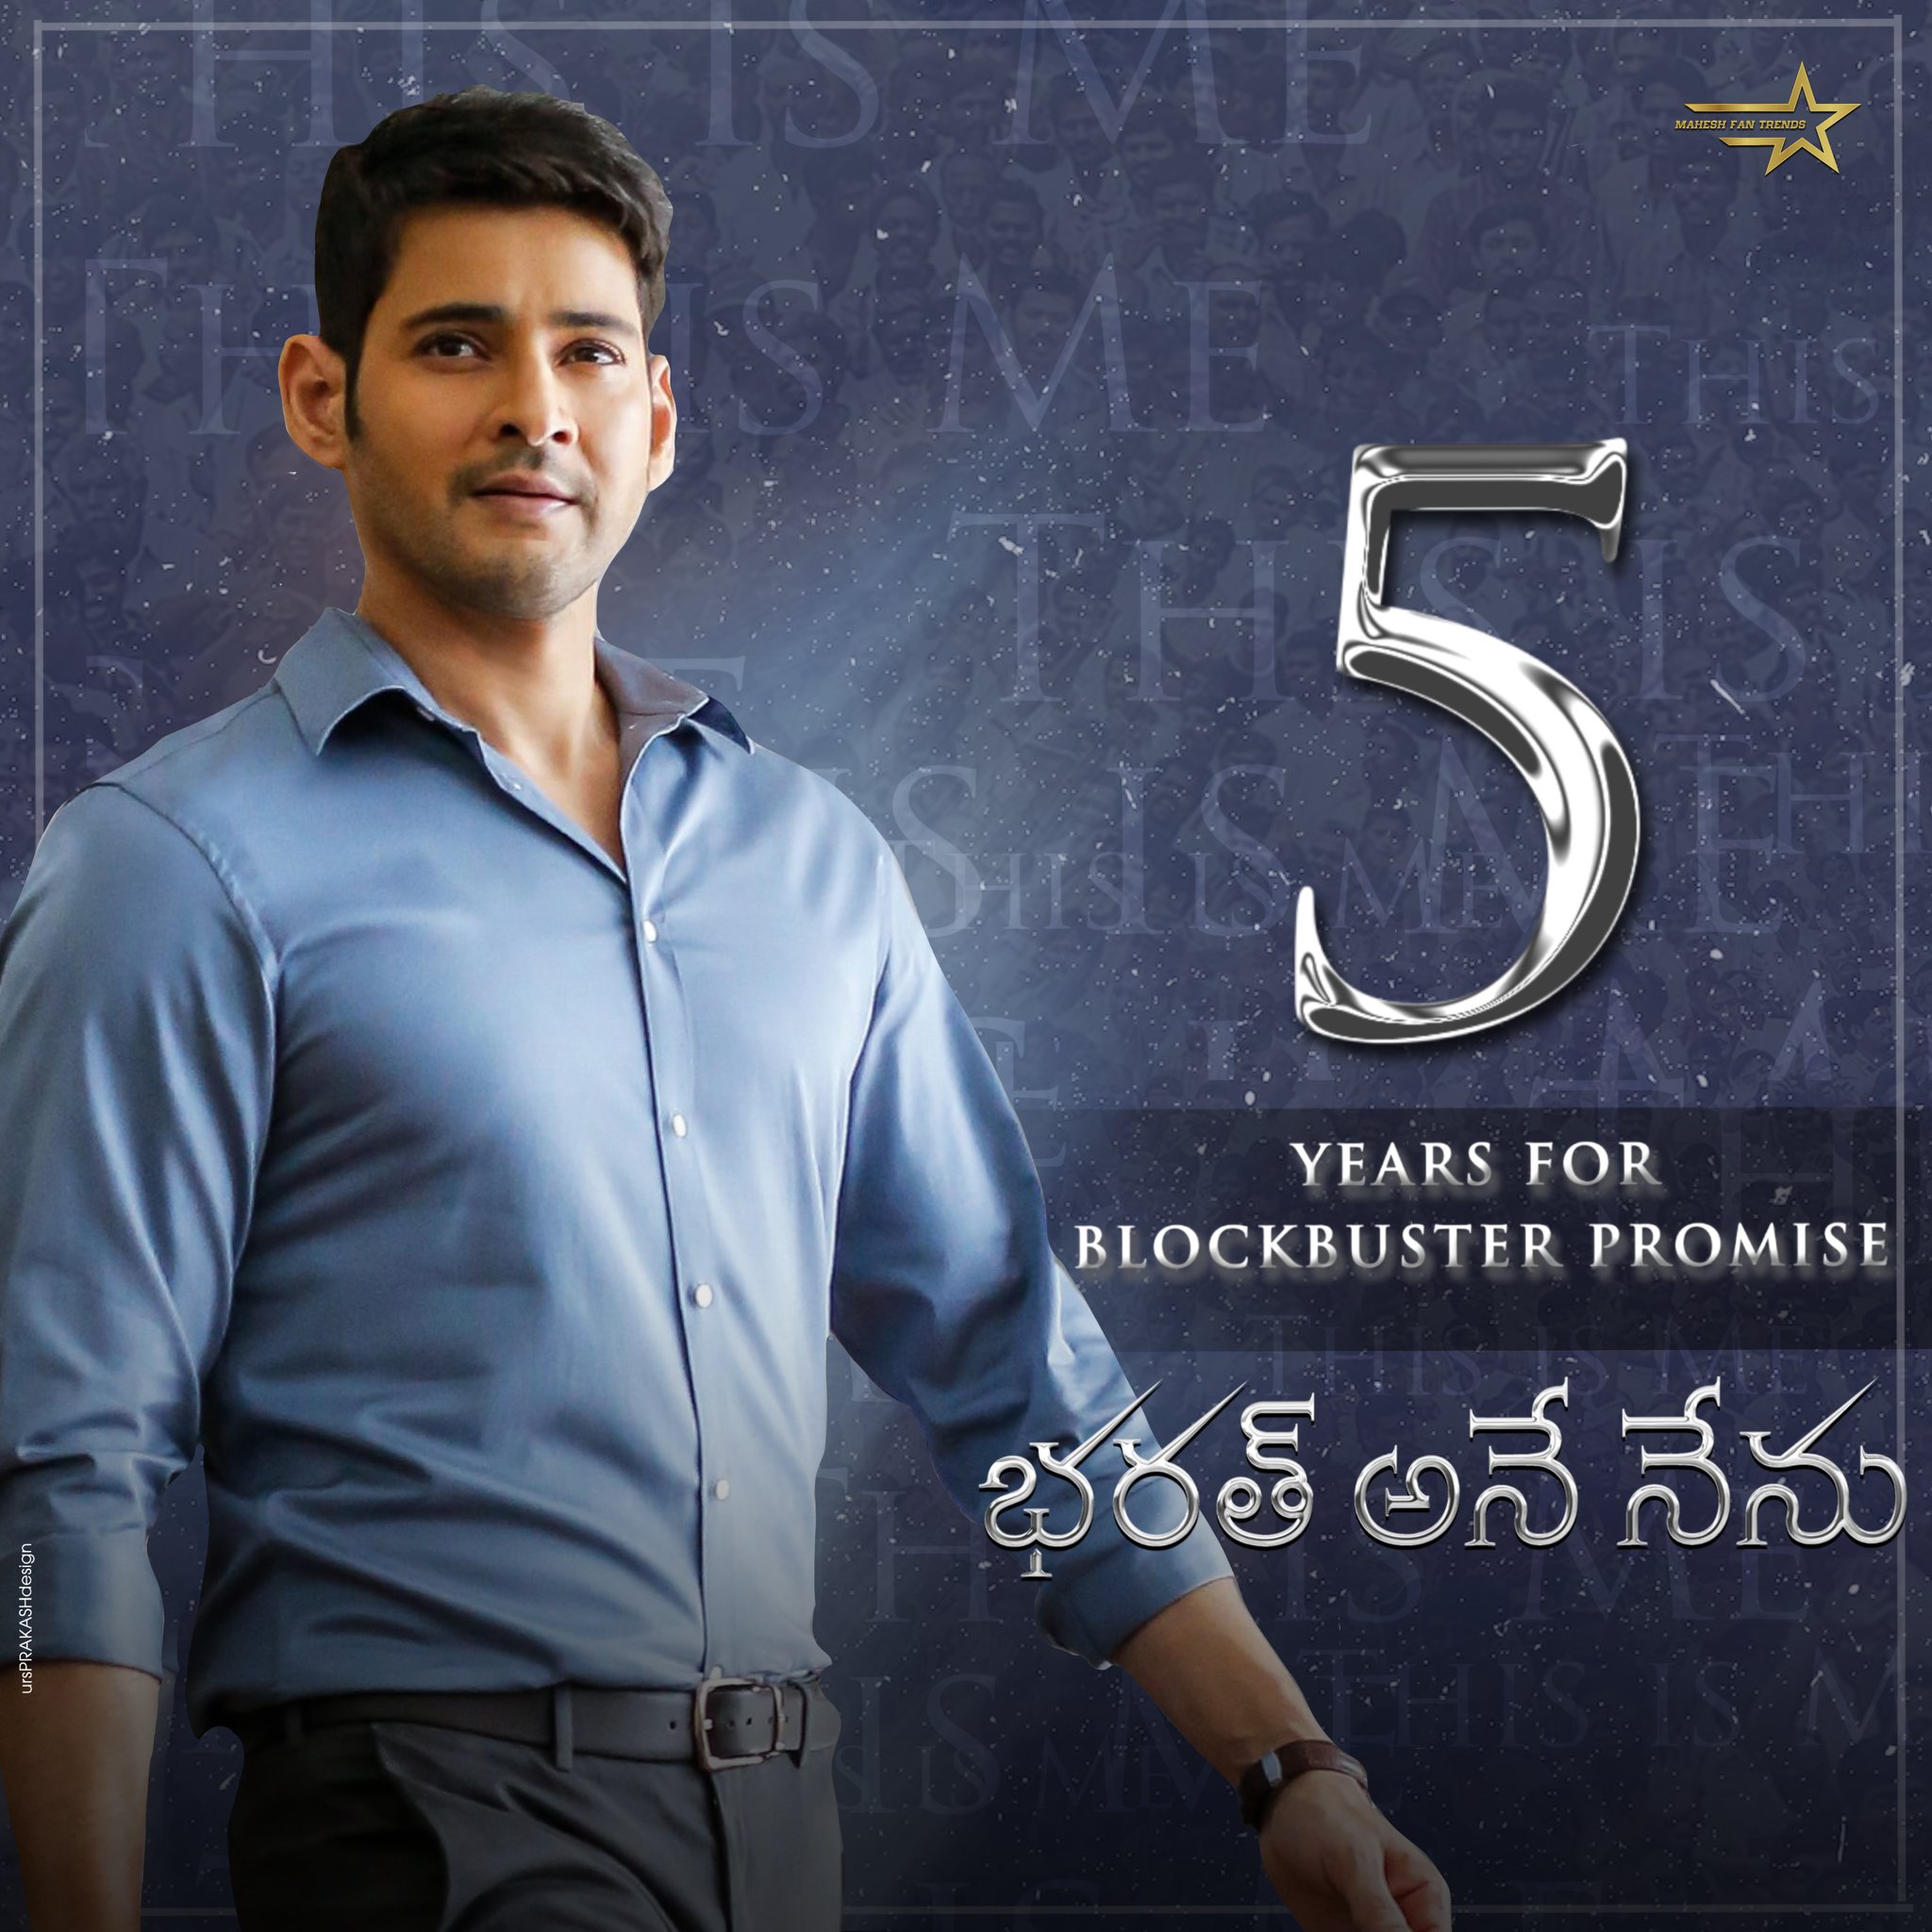 Exclusive! After 'Bharat Ane Nenu', press confrontation to be the highlight  in Mahesh Babu's 'Maharshi' too